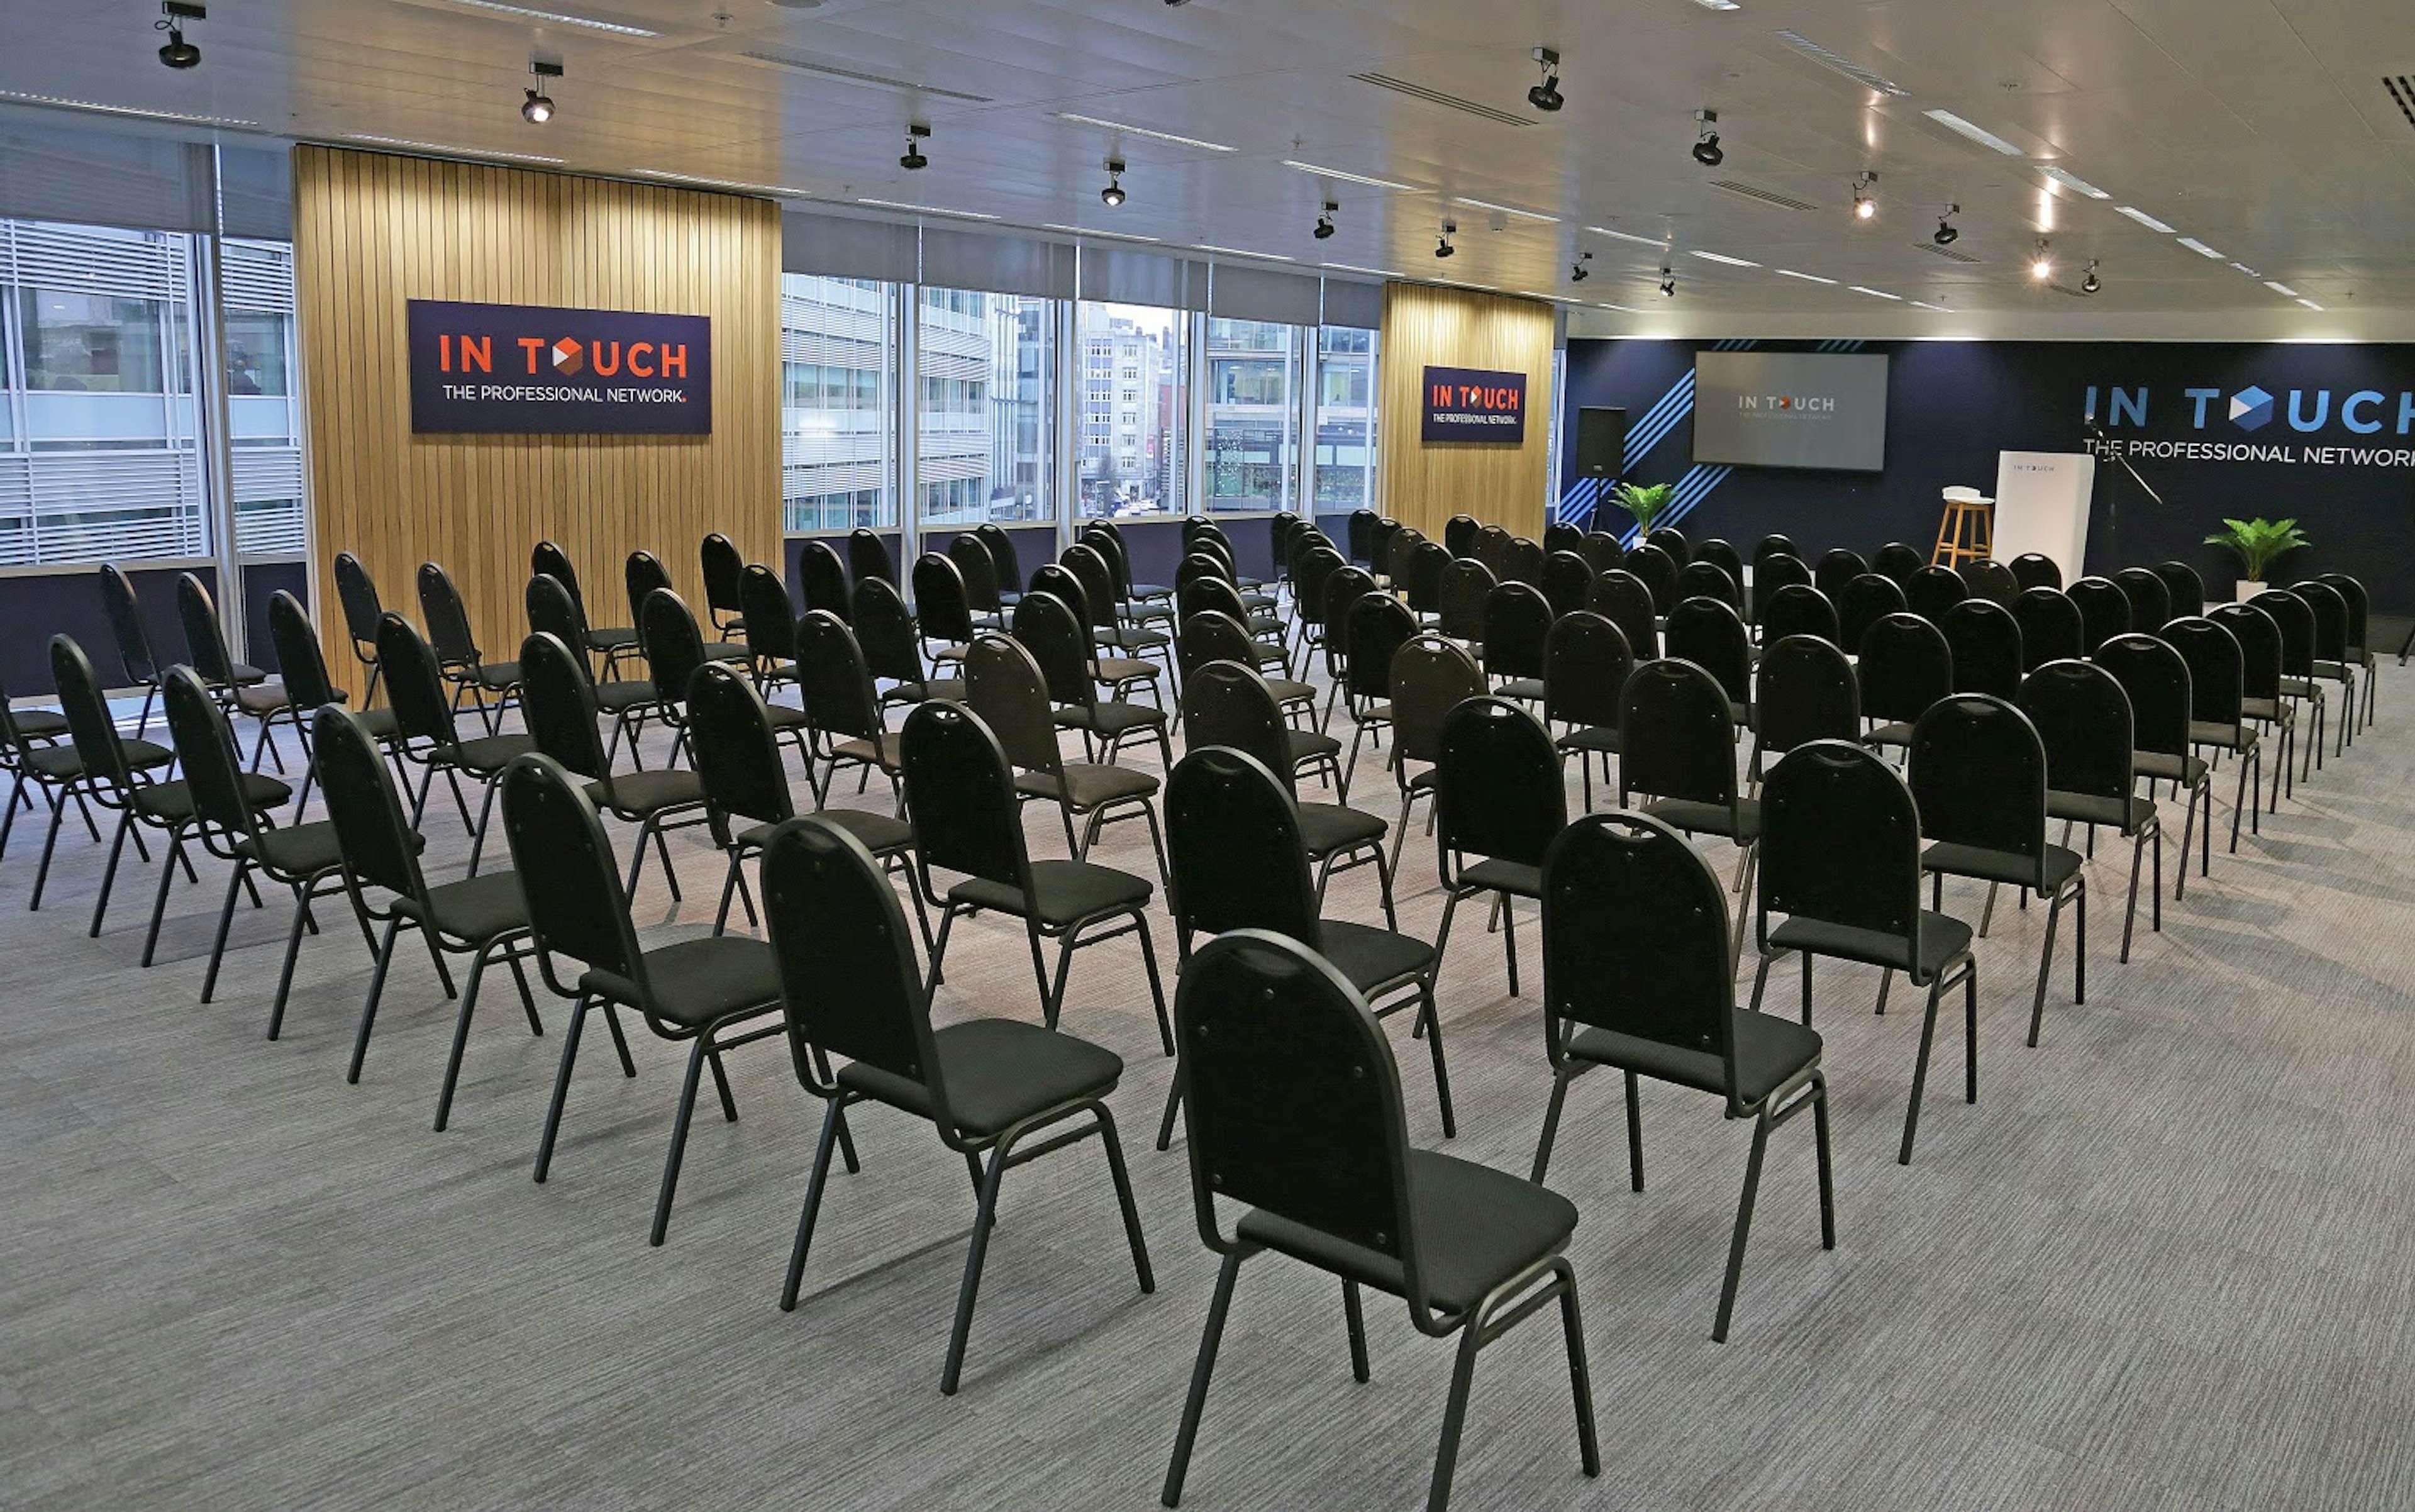 Manchester International Conference Centre - image 1